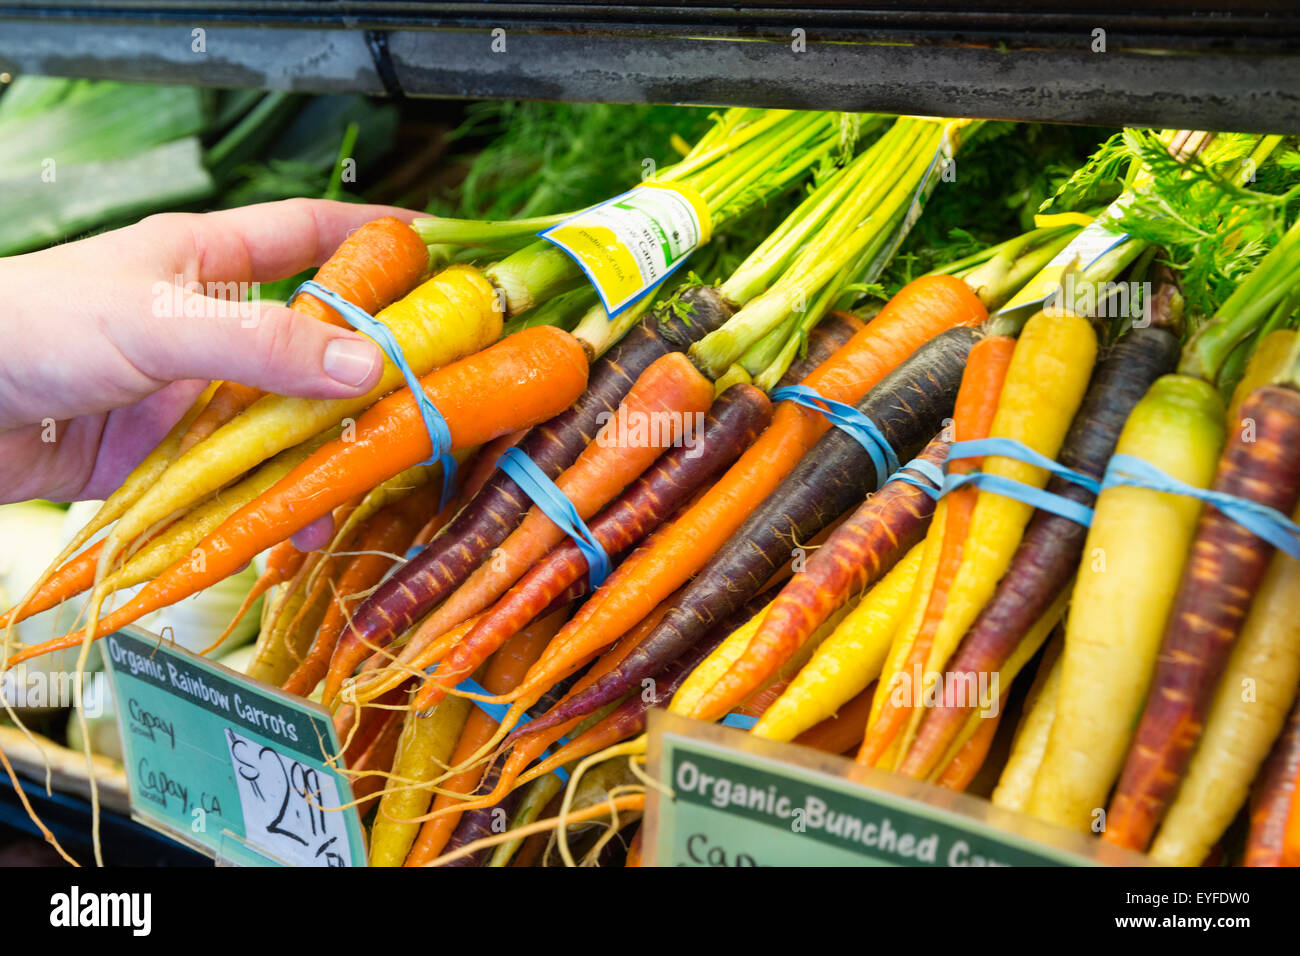 Man holding carrot in supermarket Stock Photo